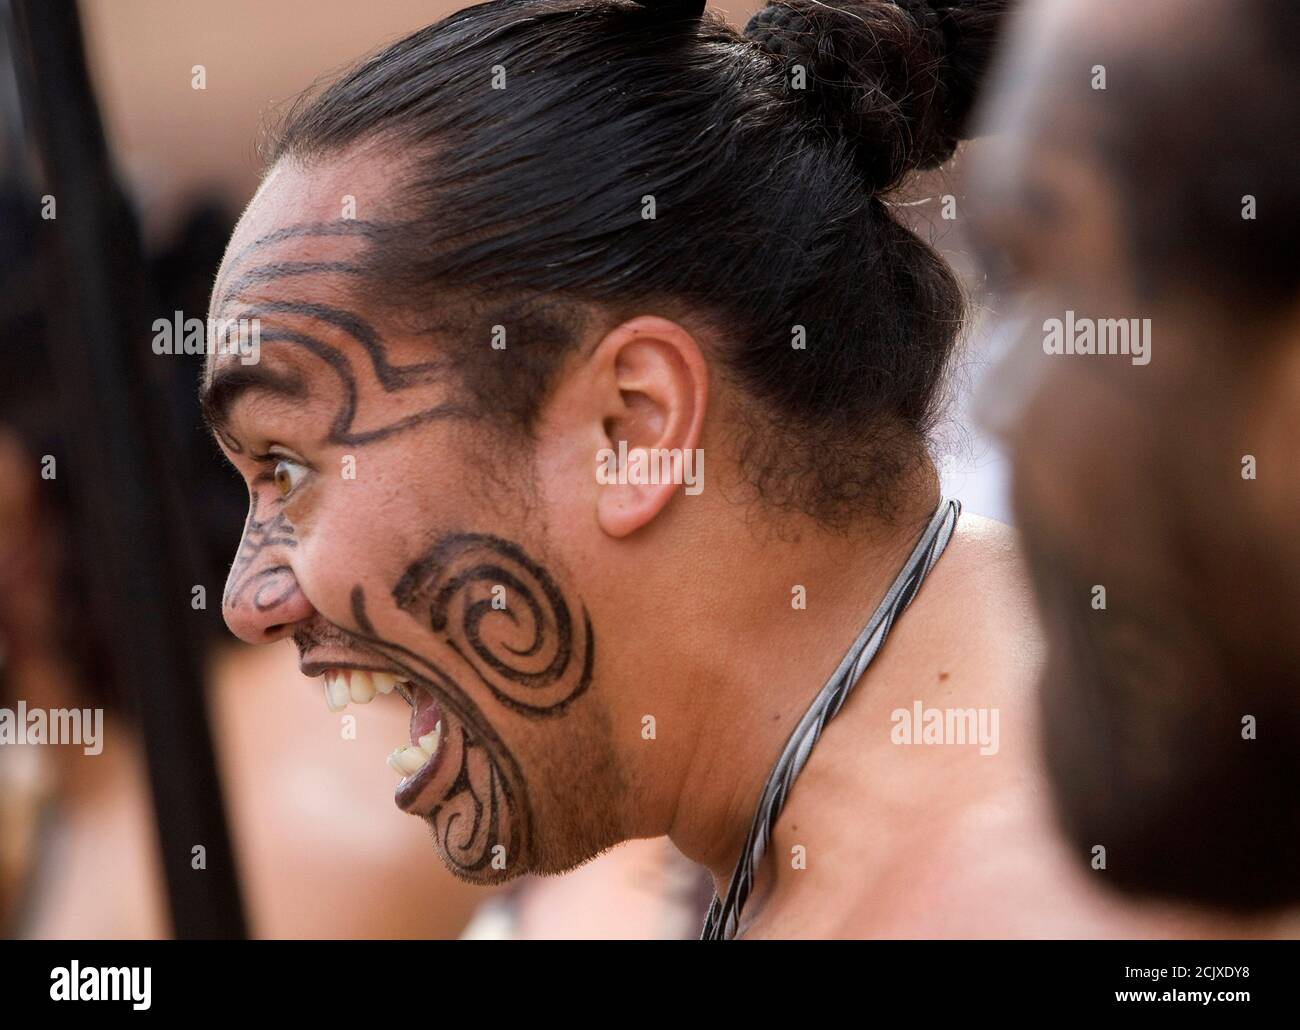 Members of traditional Maori group 'Waka Huia' perform in San Marco square, as part of the opening of the New Zealand pavilion at the Venice Biennale June 3, 2009. The Biennale, one of the world's major art festivals traditionally held every two years dating back to 1895, is open to the public June 7 - November 22, 2009. REUTERS/Tony Gentile  (ITALY SOCIETY) Stock Photo